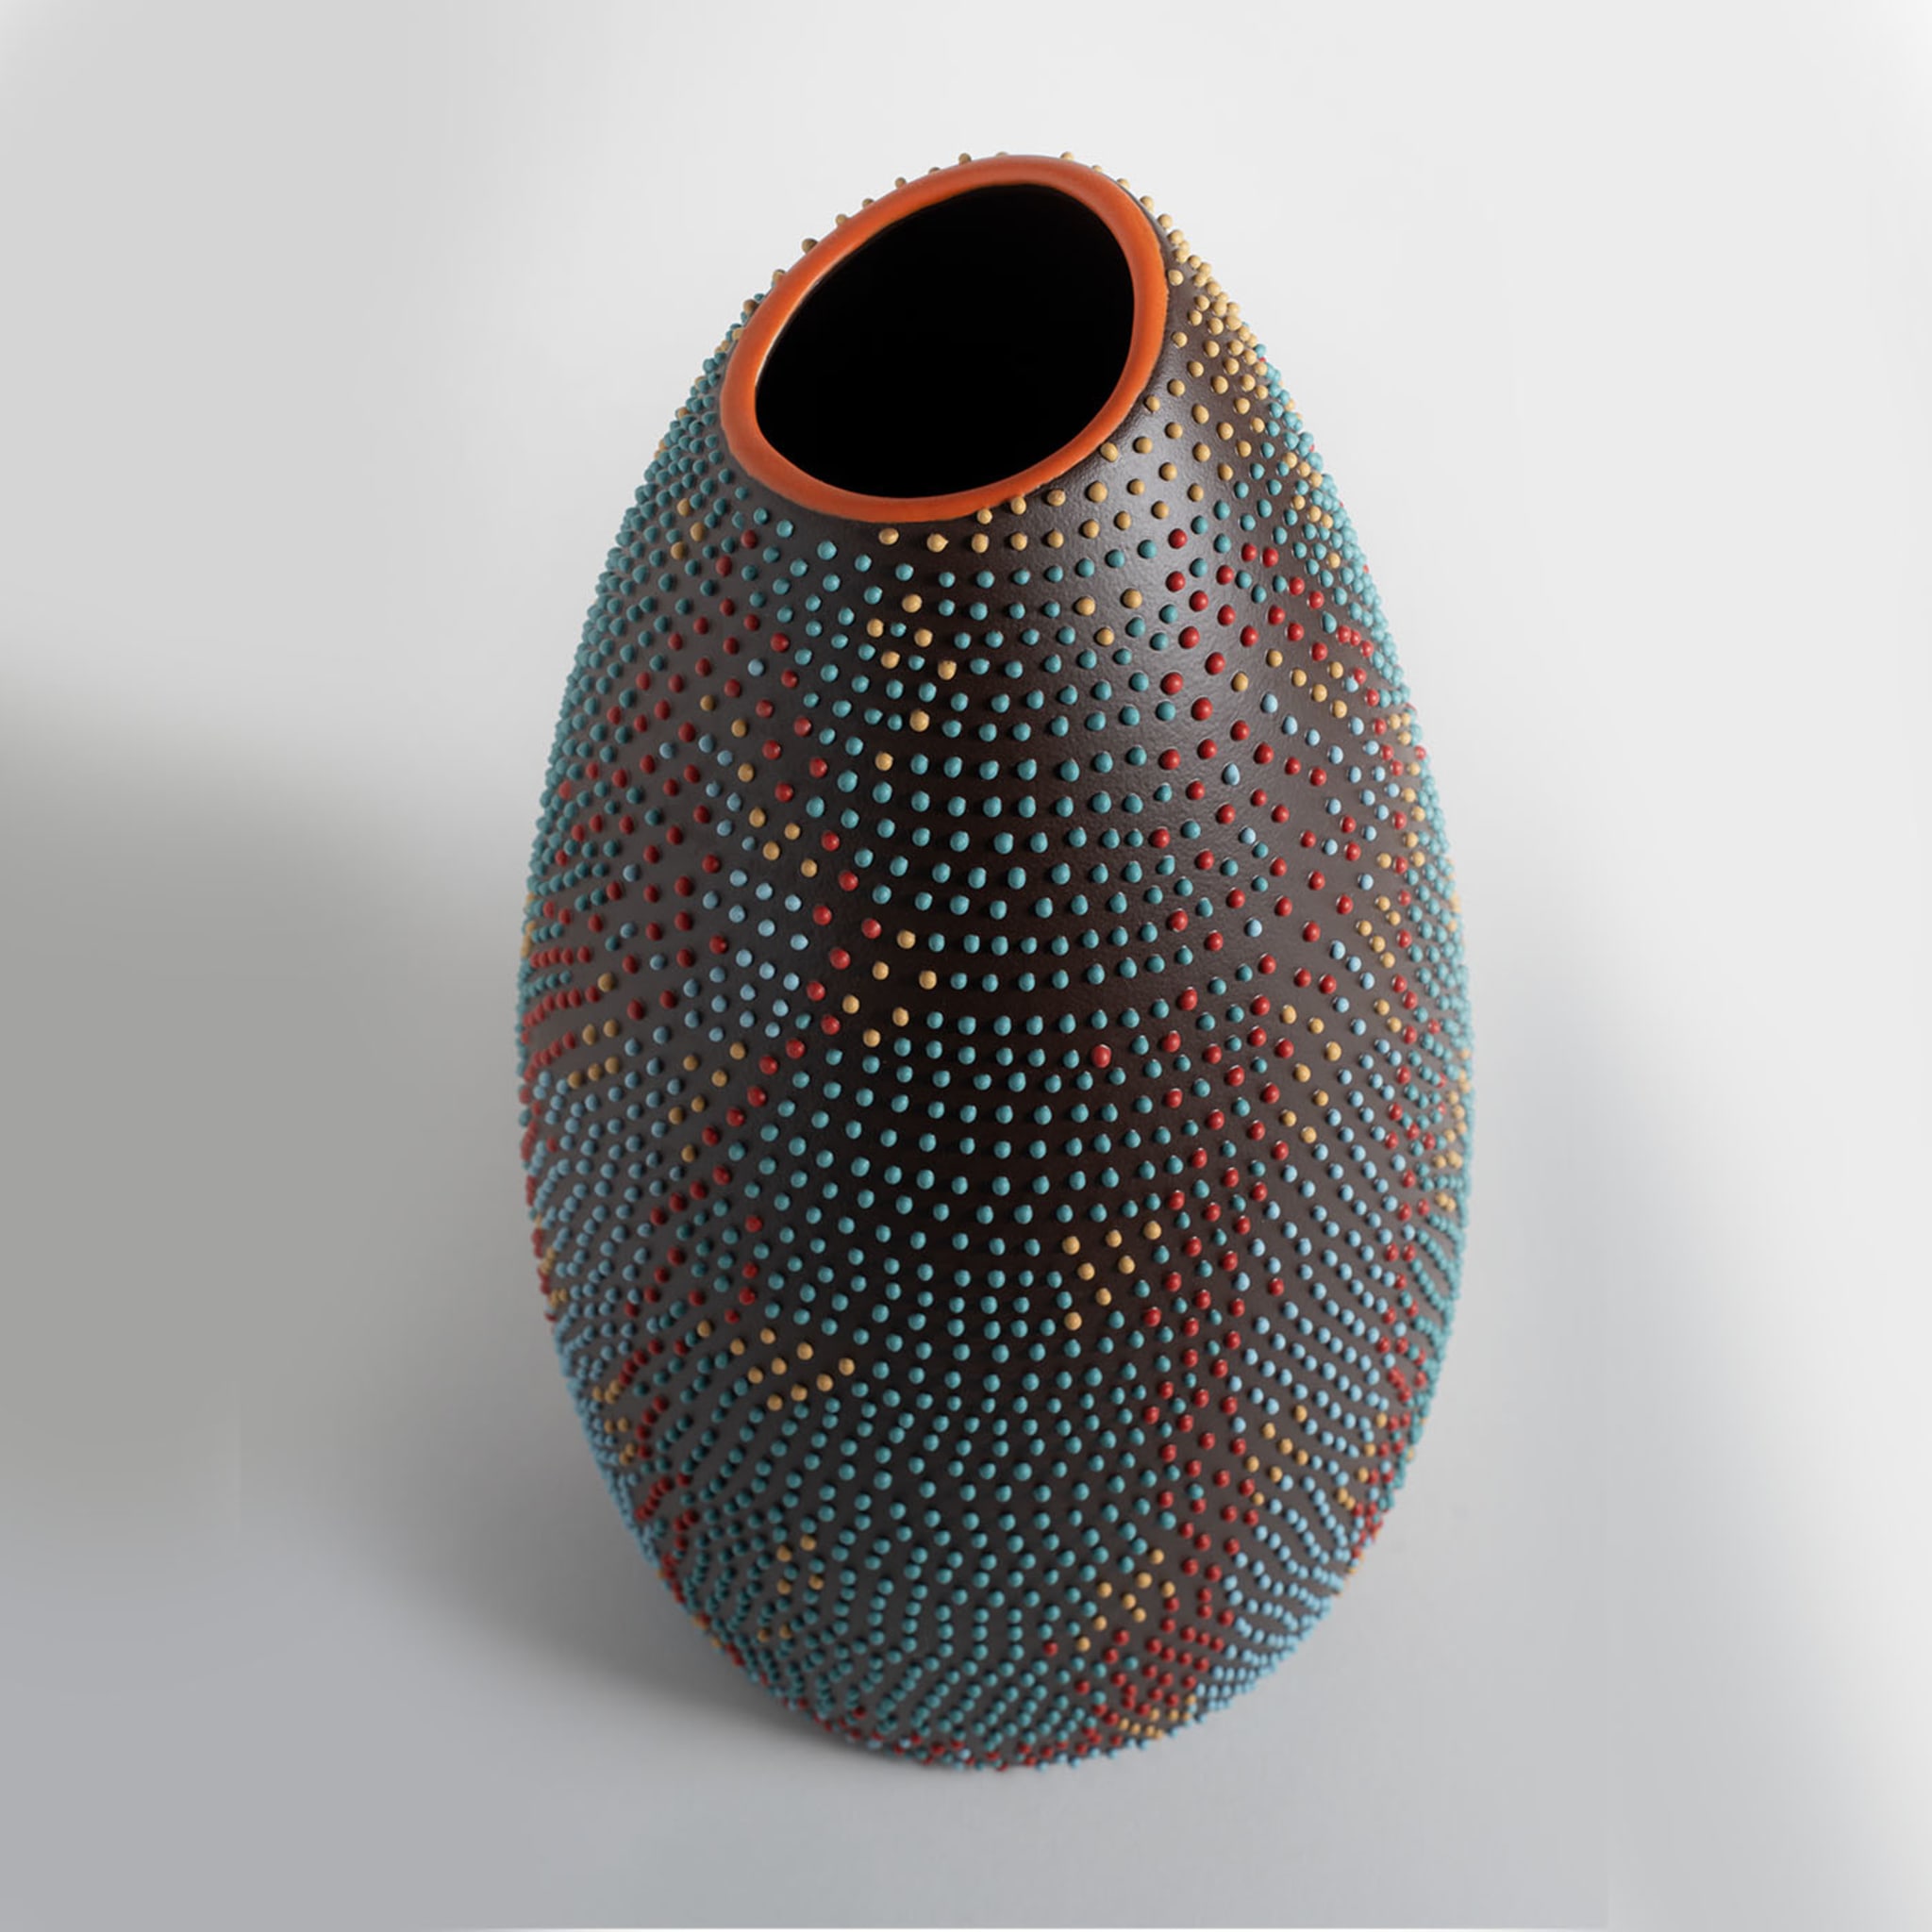 RIC-4 Chameleon Polychrome Vase by A. Mancuso/Analogia Projects - Alternative view 5